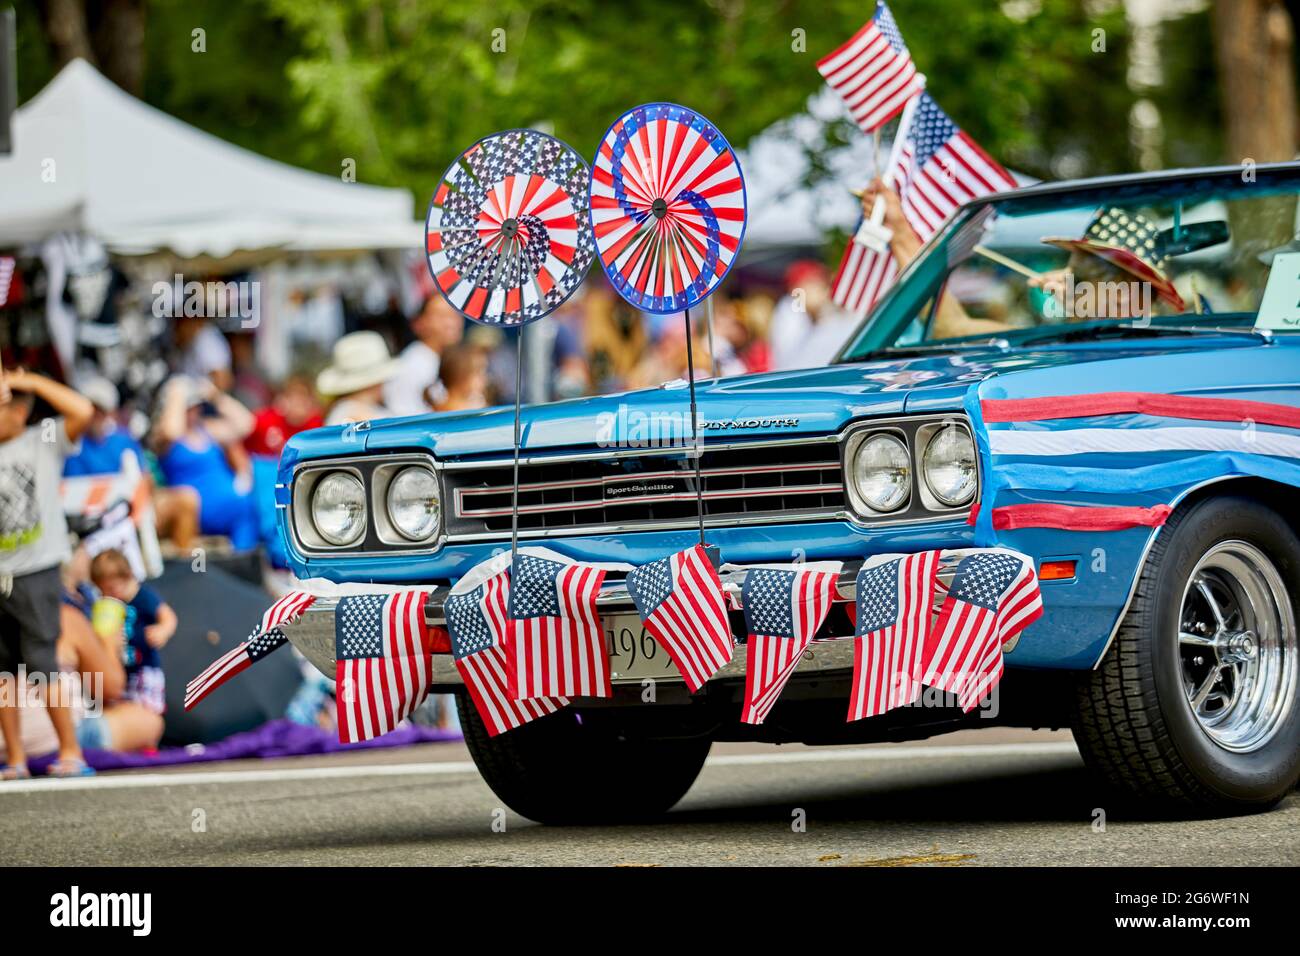 Prescott, Arizona, USA - July 3, 2021: The front of an antique car decorated with flags in the 4th of July parade Stock Photo